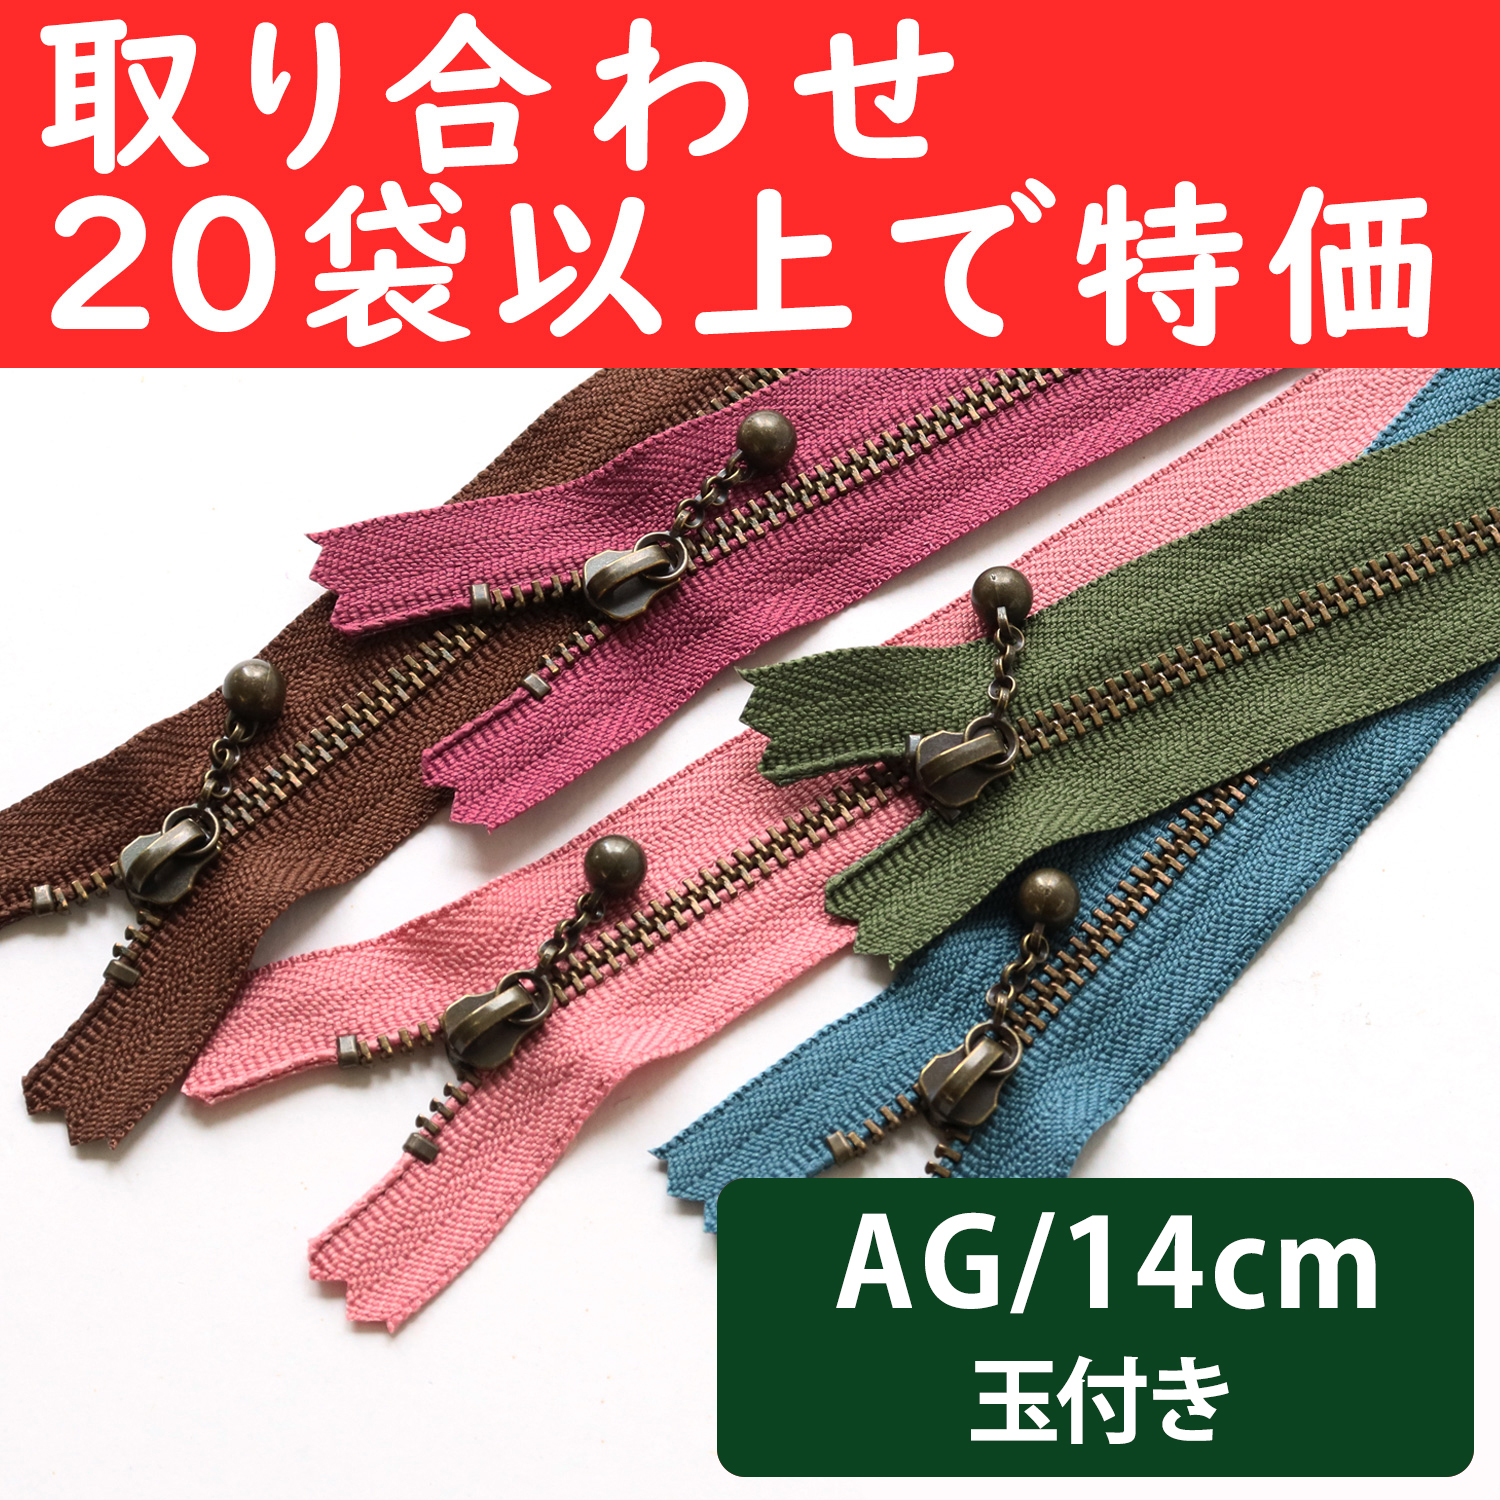 3GKB14-OVER200 Special)Ball Pull Zippers  AG 14cm ", orders with 20 bags or more (bag)